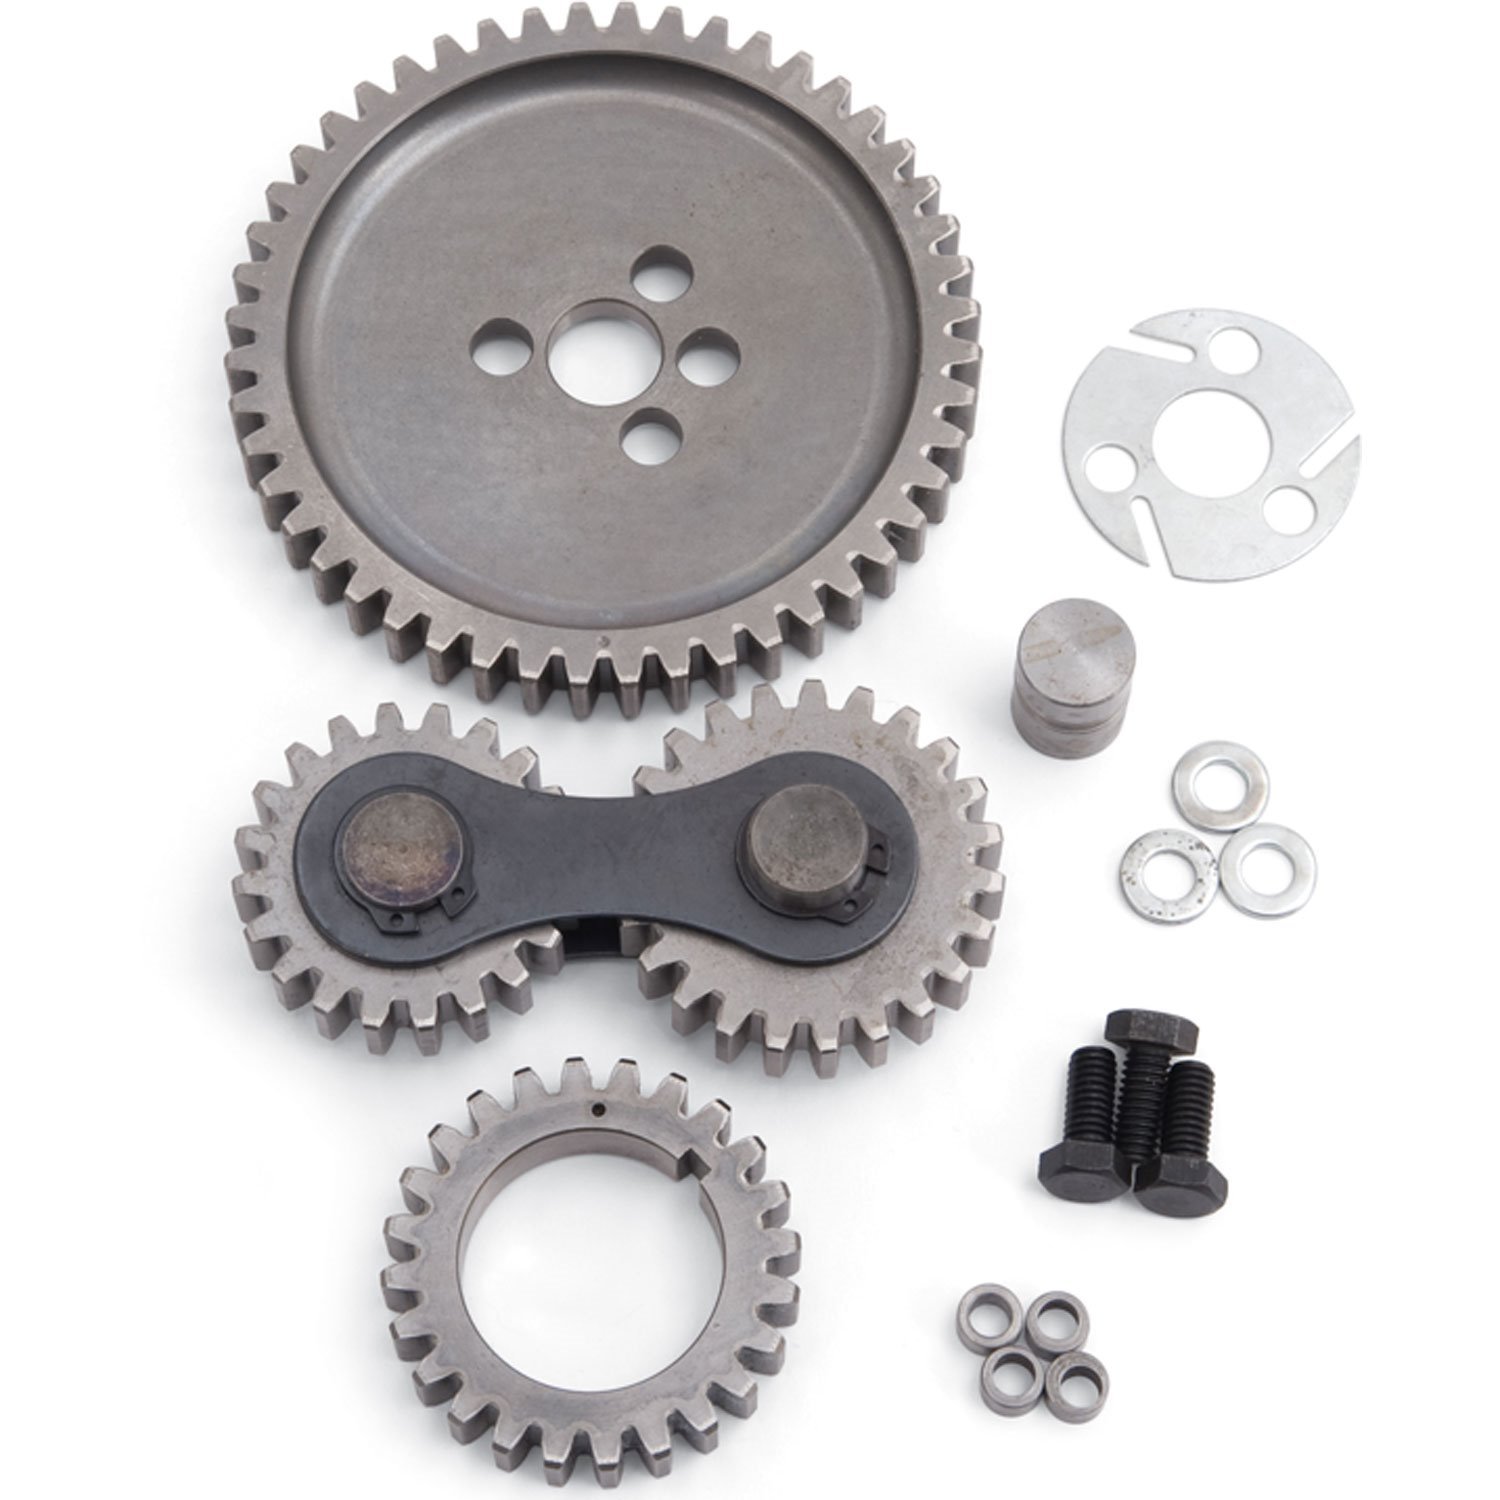 Accu-Drive Camshaft Timing Gear Drive for 1965-1990 Big Block Chevy